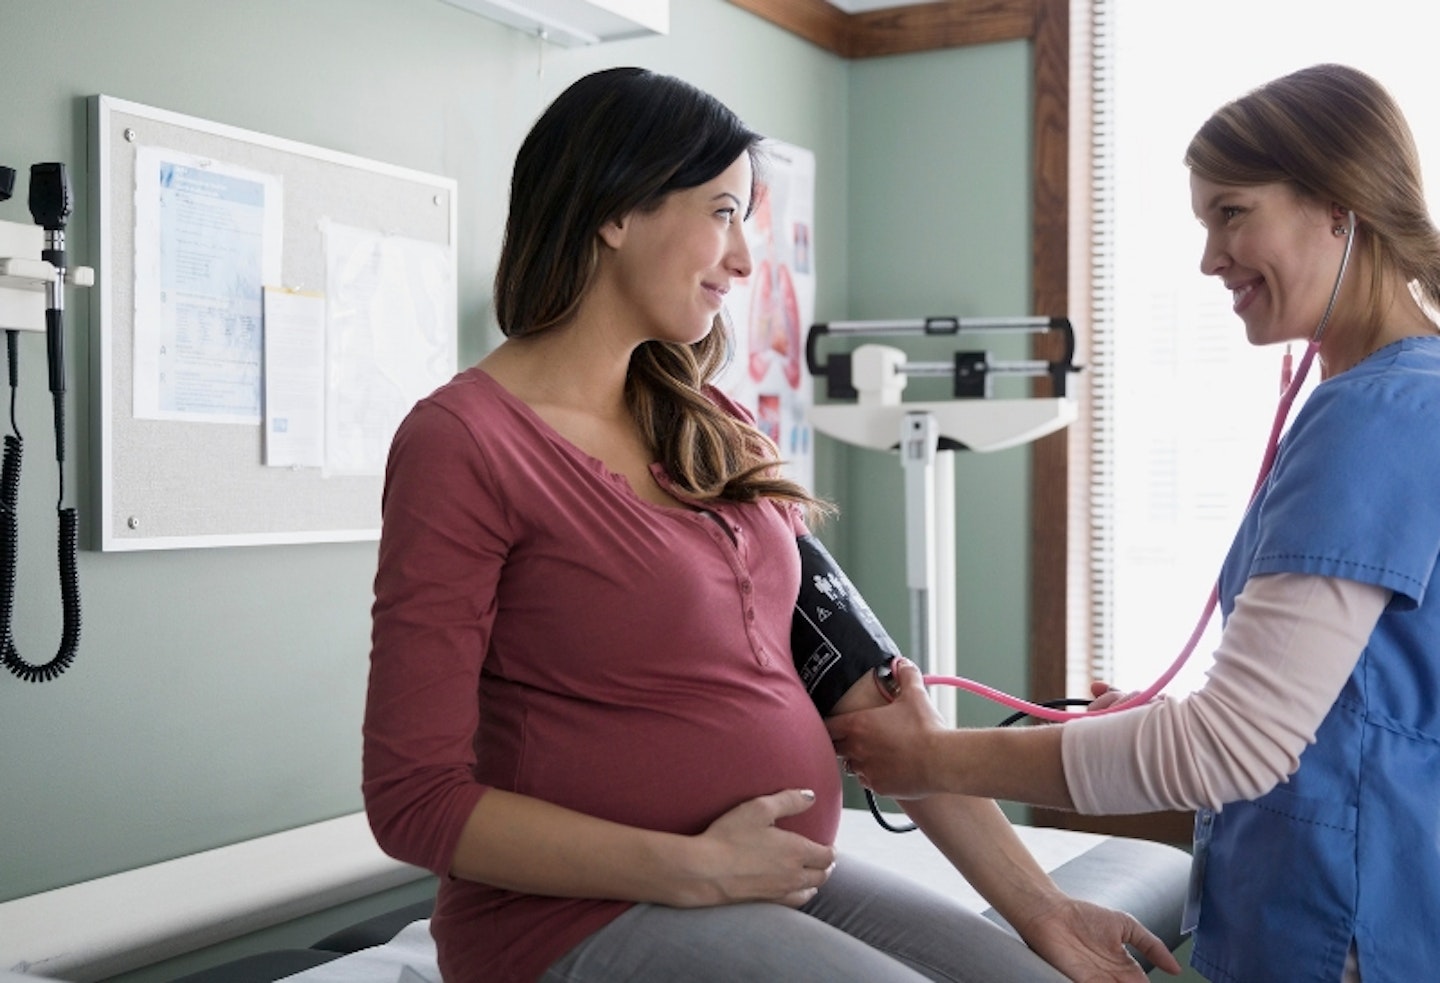 Pregnant woman seeing doctor